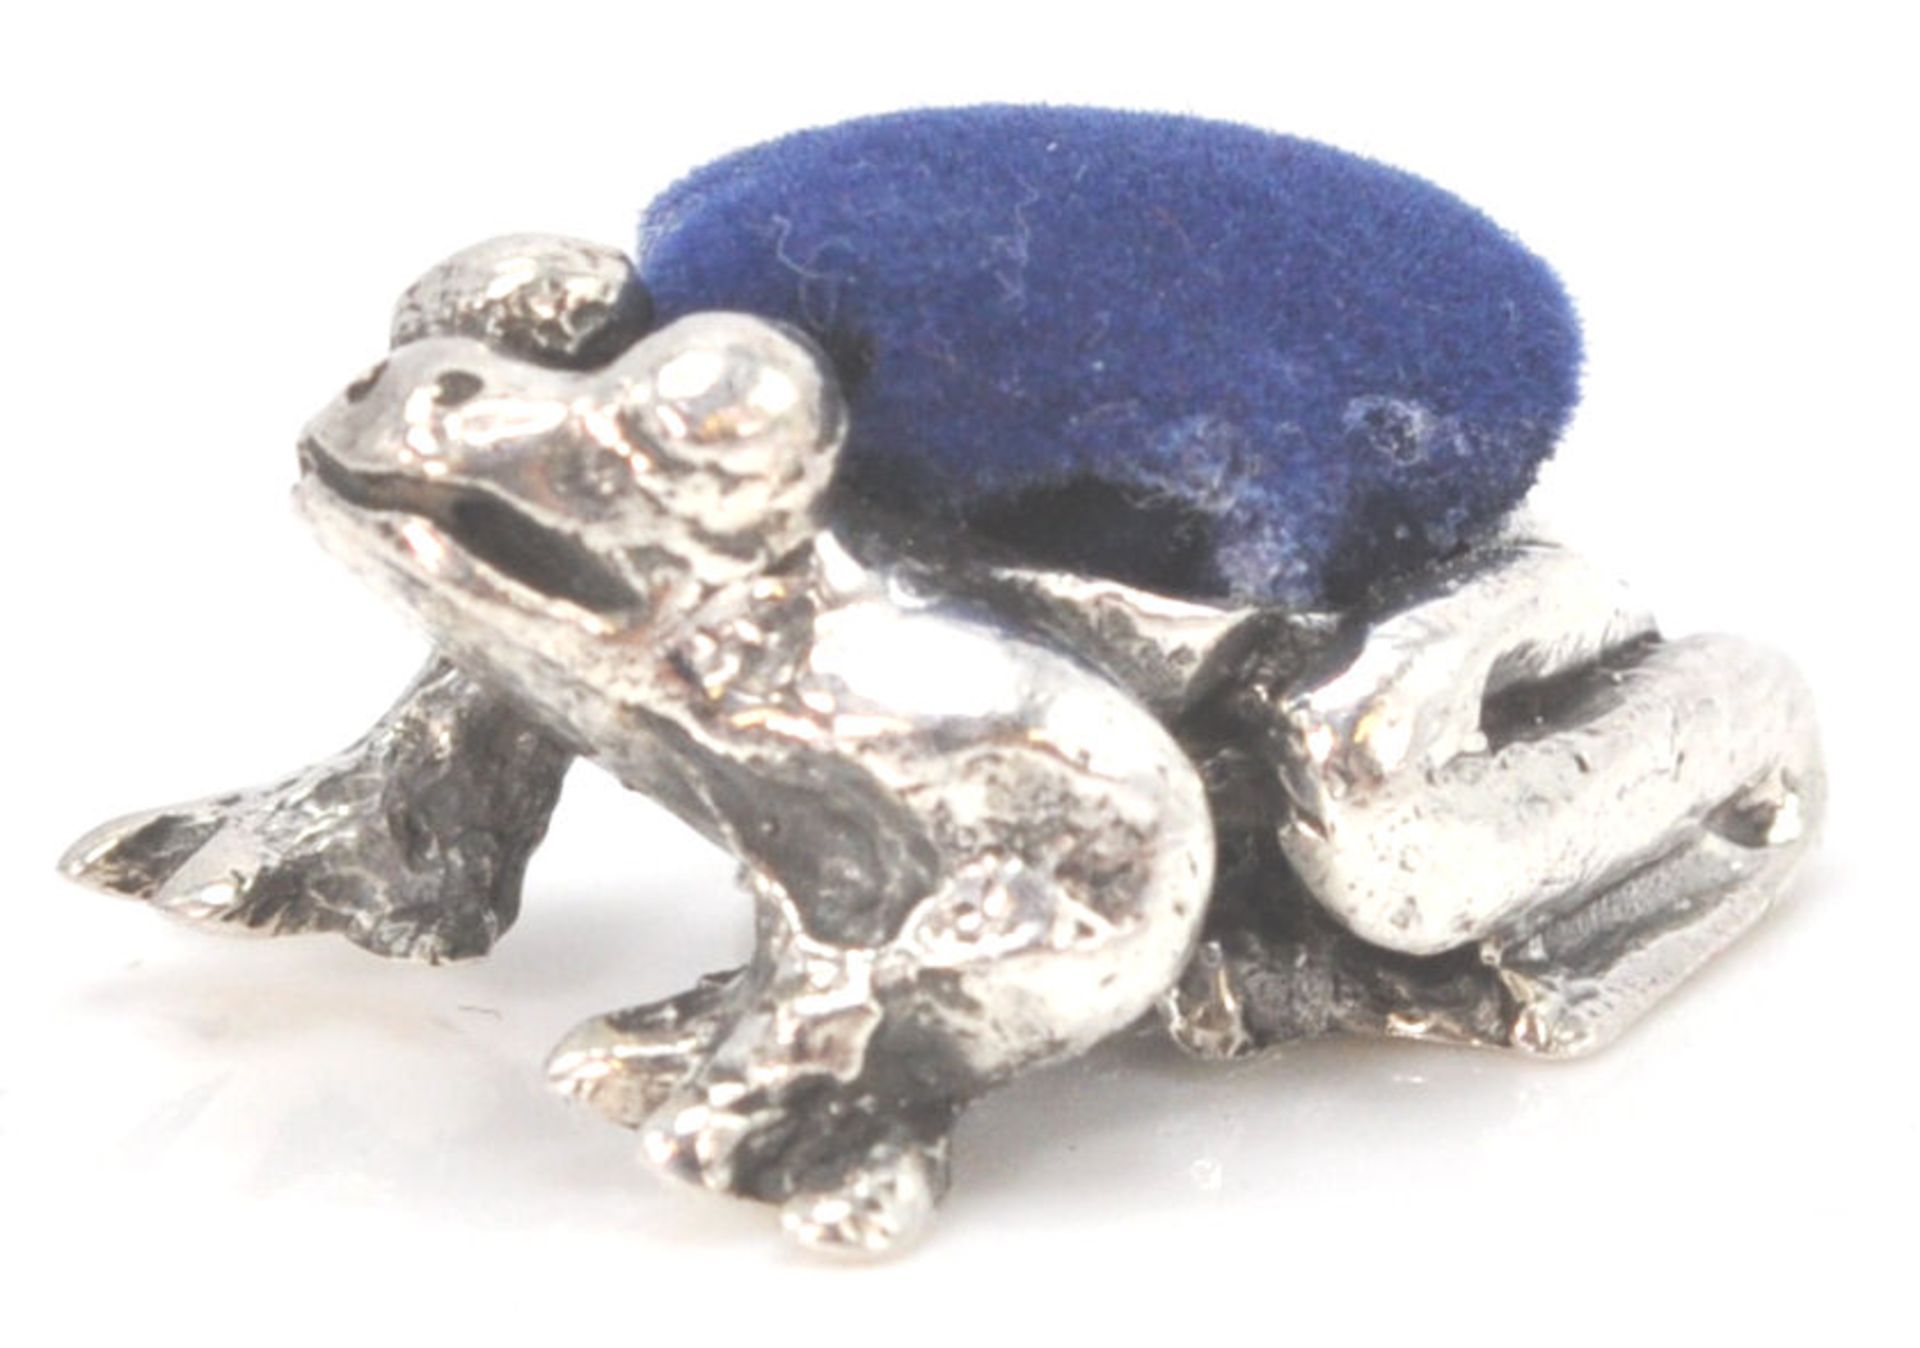 A stamped sterling silver pincushion in the form of an Amazonian treefrog with a blue velvet cushion